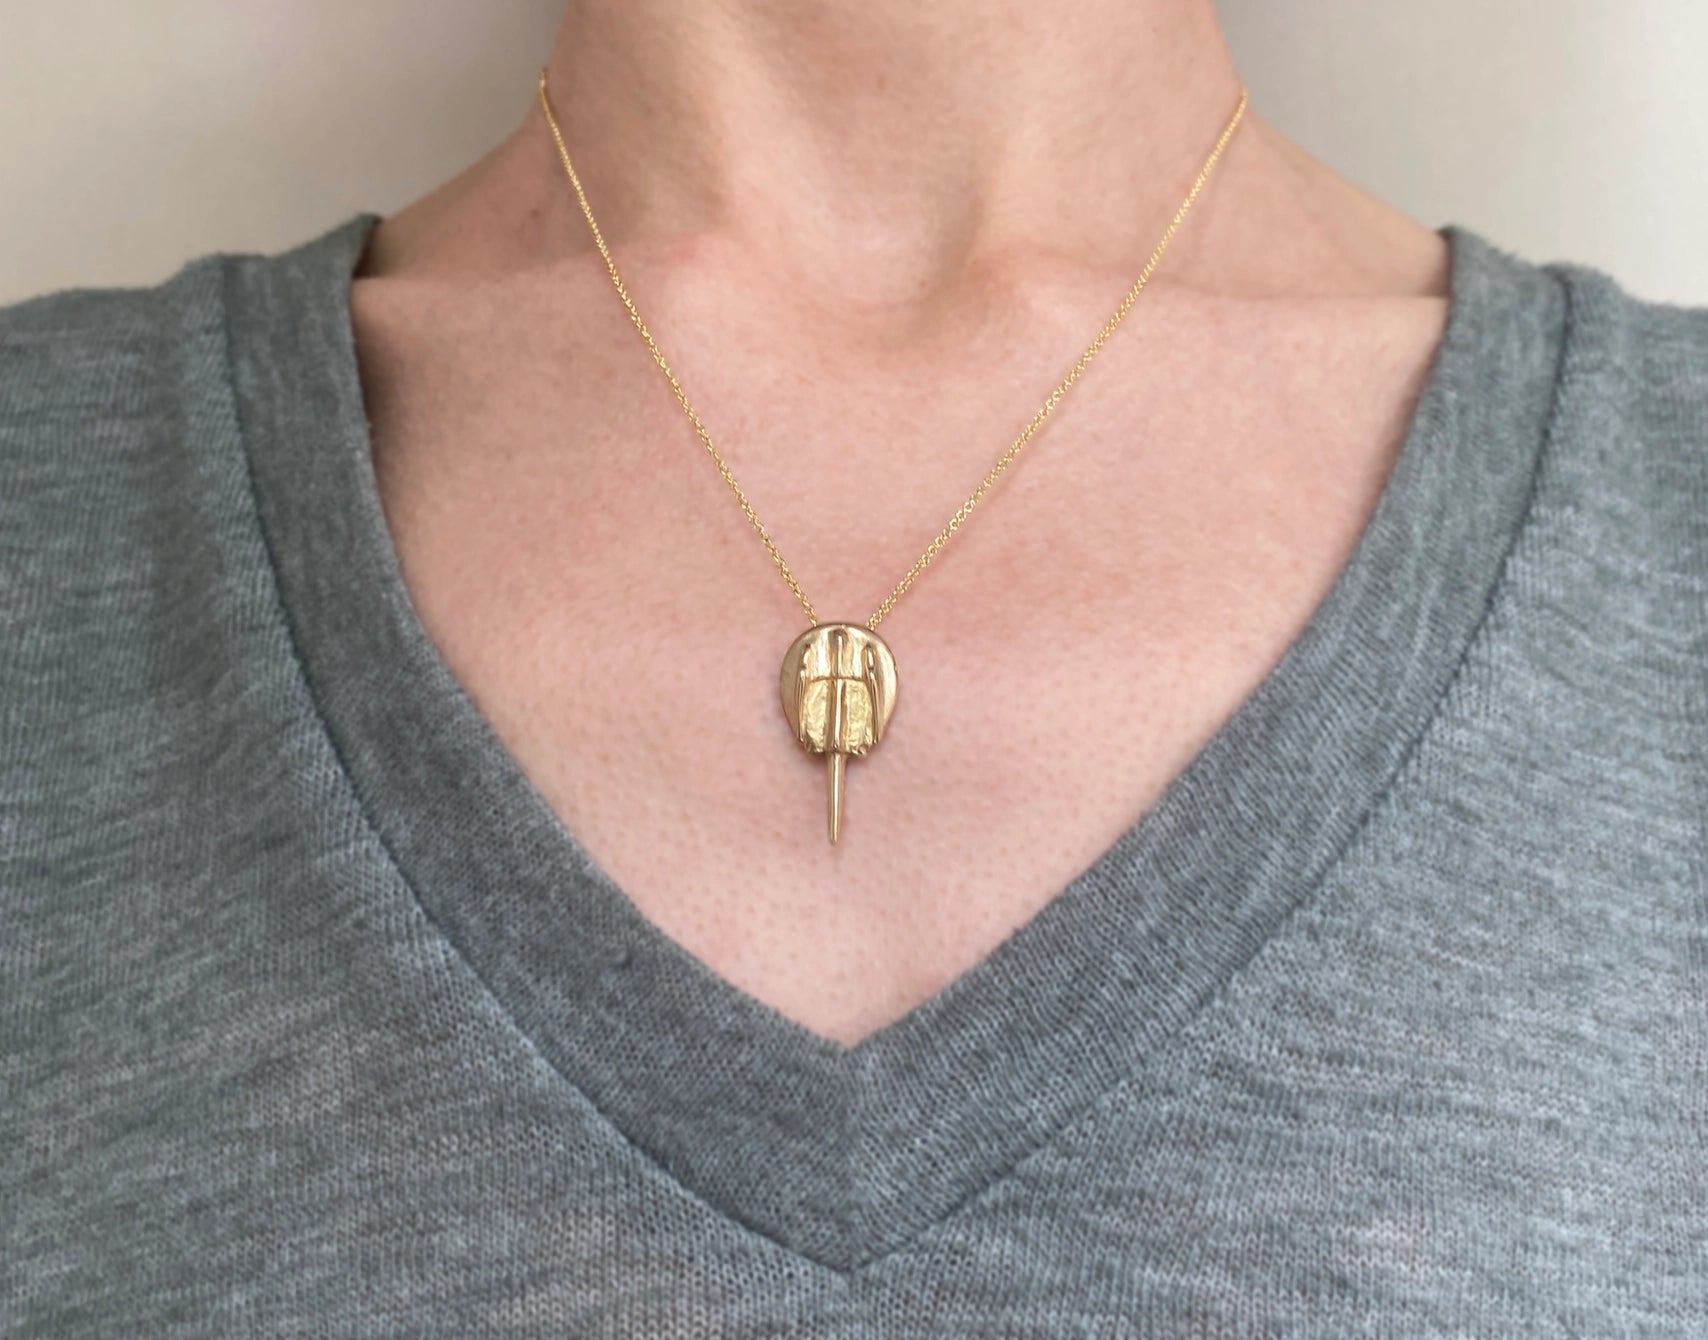 Gold filled necklace with bronze horseshoe crab